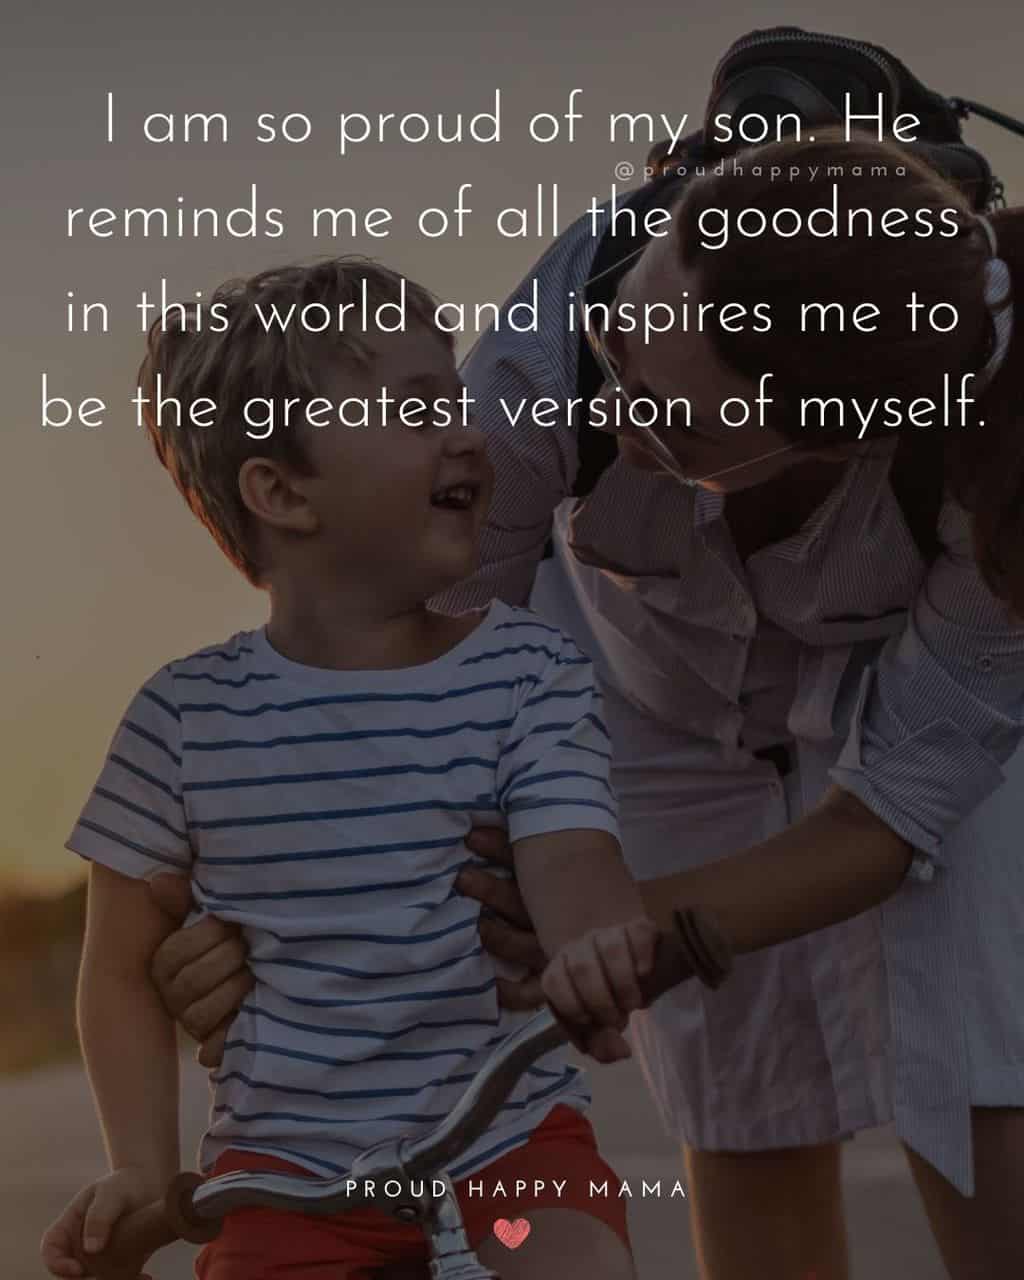 Son Quotes - I am so proud of my son. He reminds me of all the goodness in this world and inspires me to be the greatest version